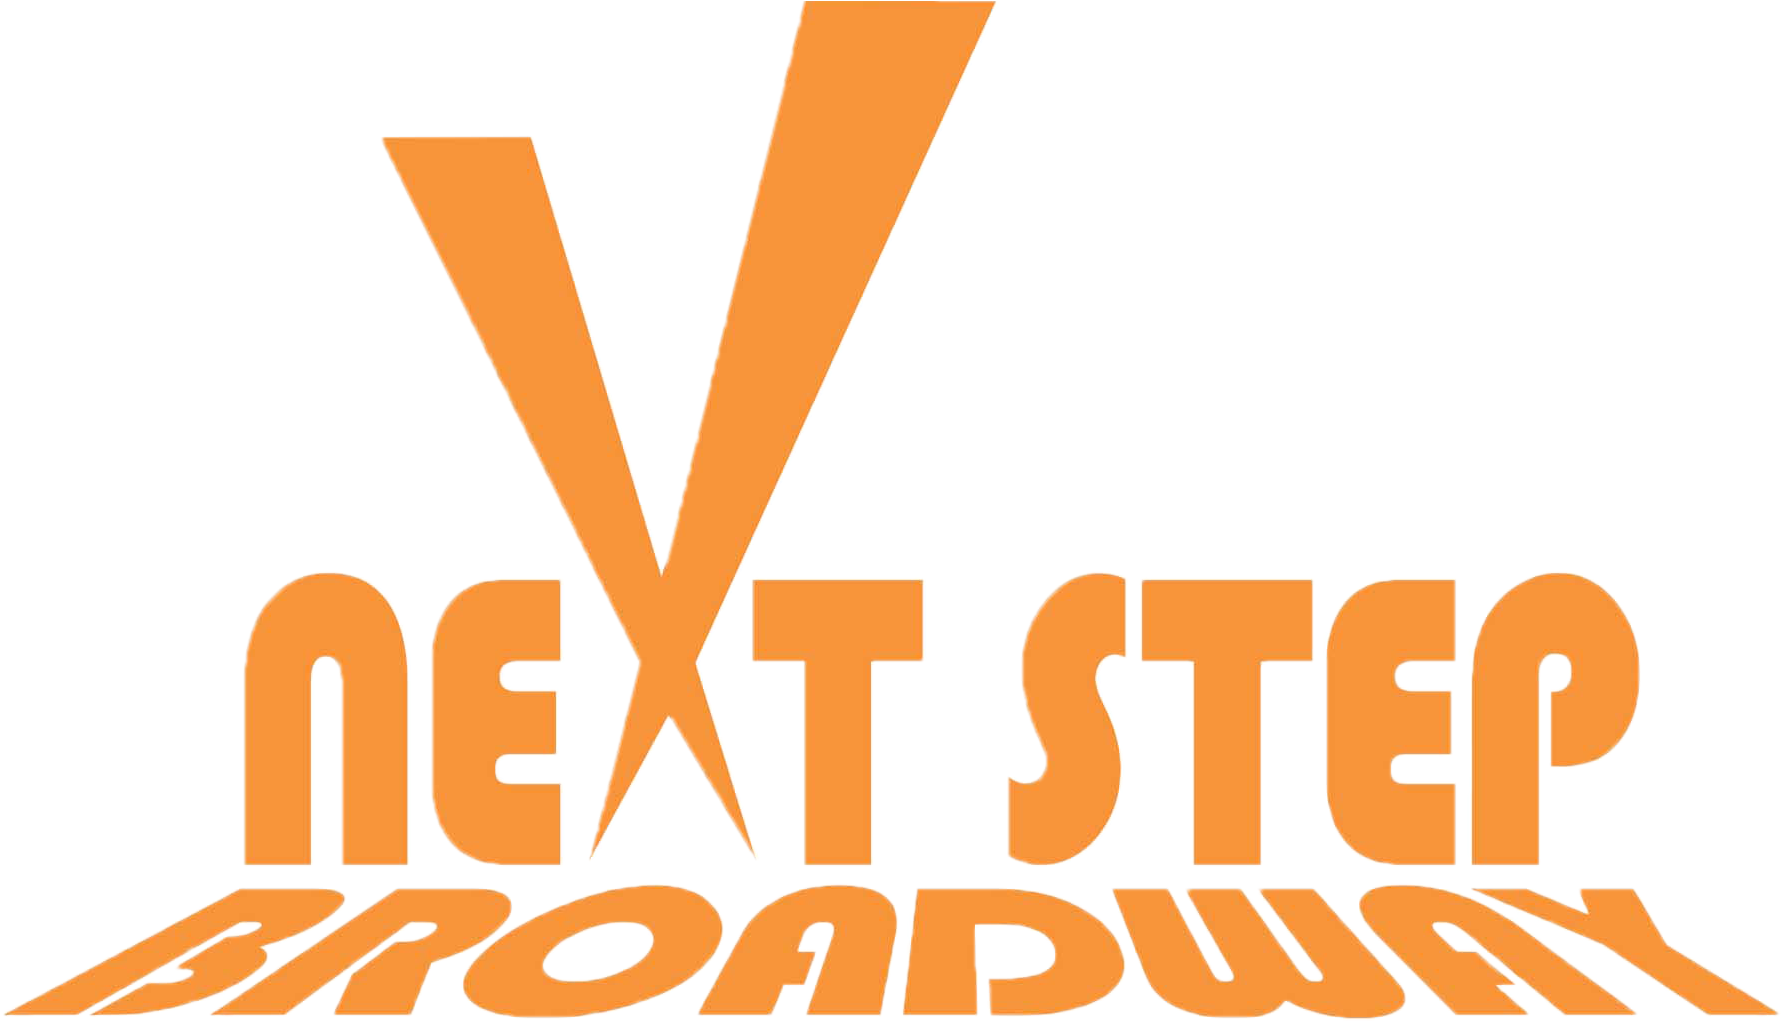 A Logo With Orange Letters